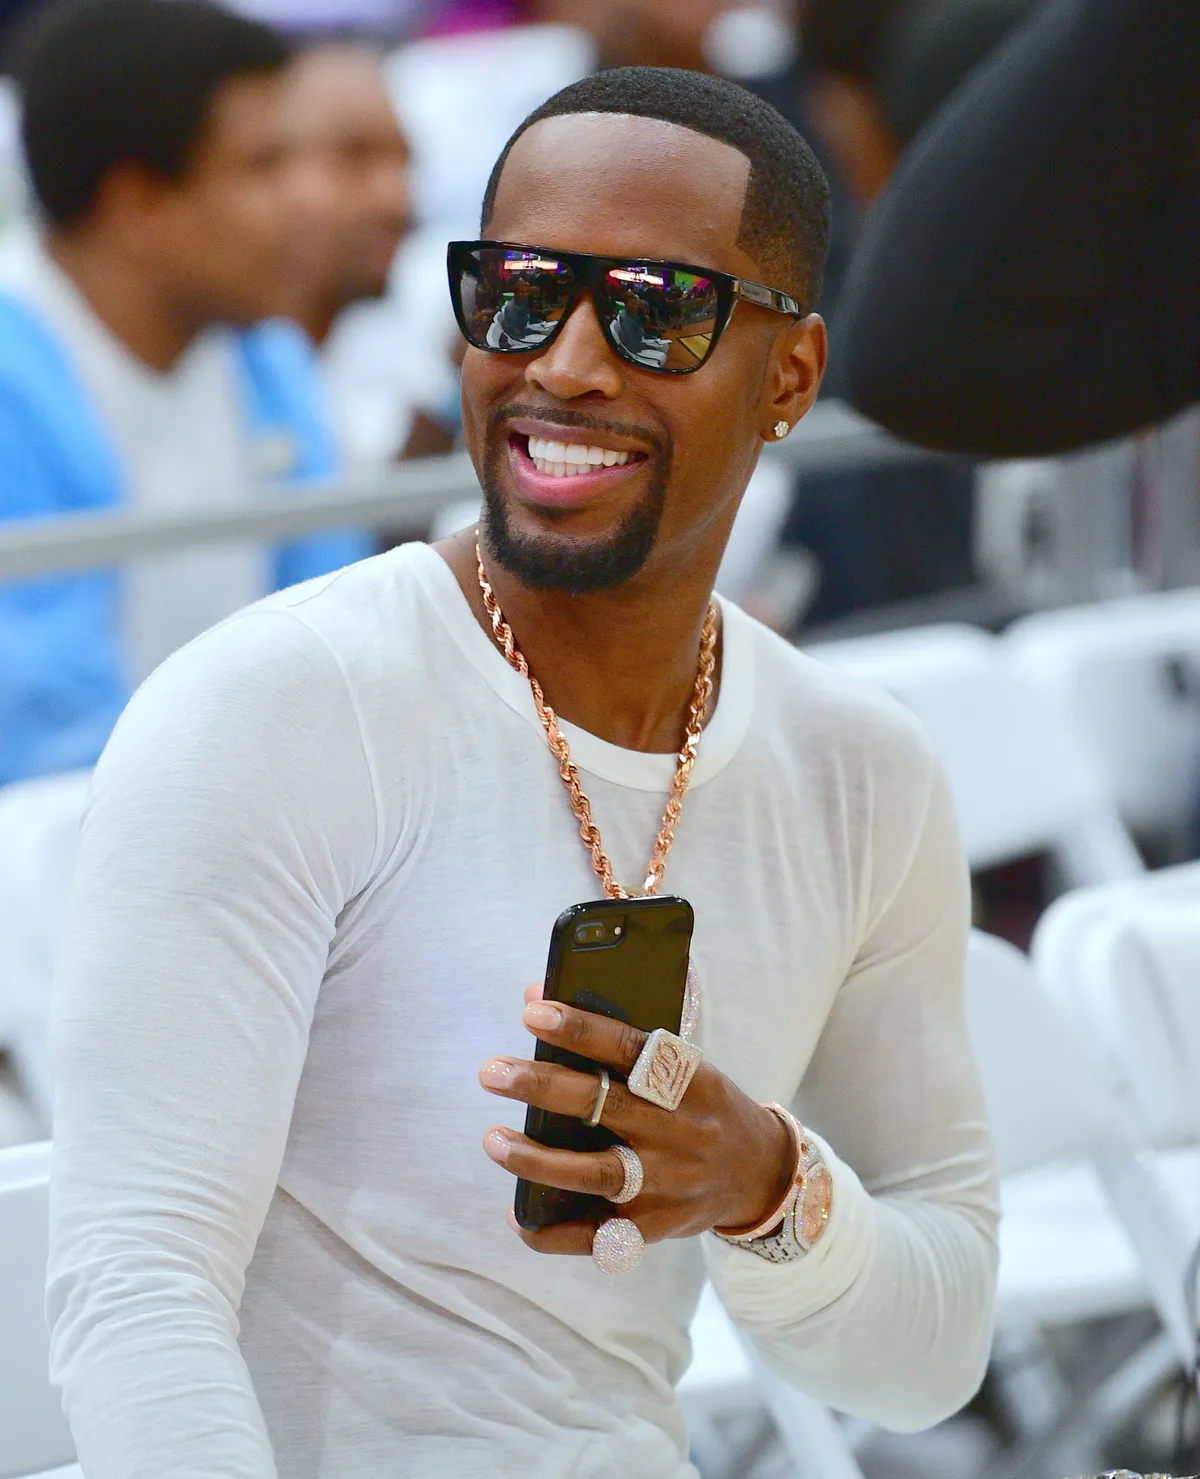 Safaree at the 2018 BET Experience in Los Angeles Convention Center on June 23, 2018. | Photo: Getty Images